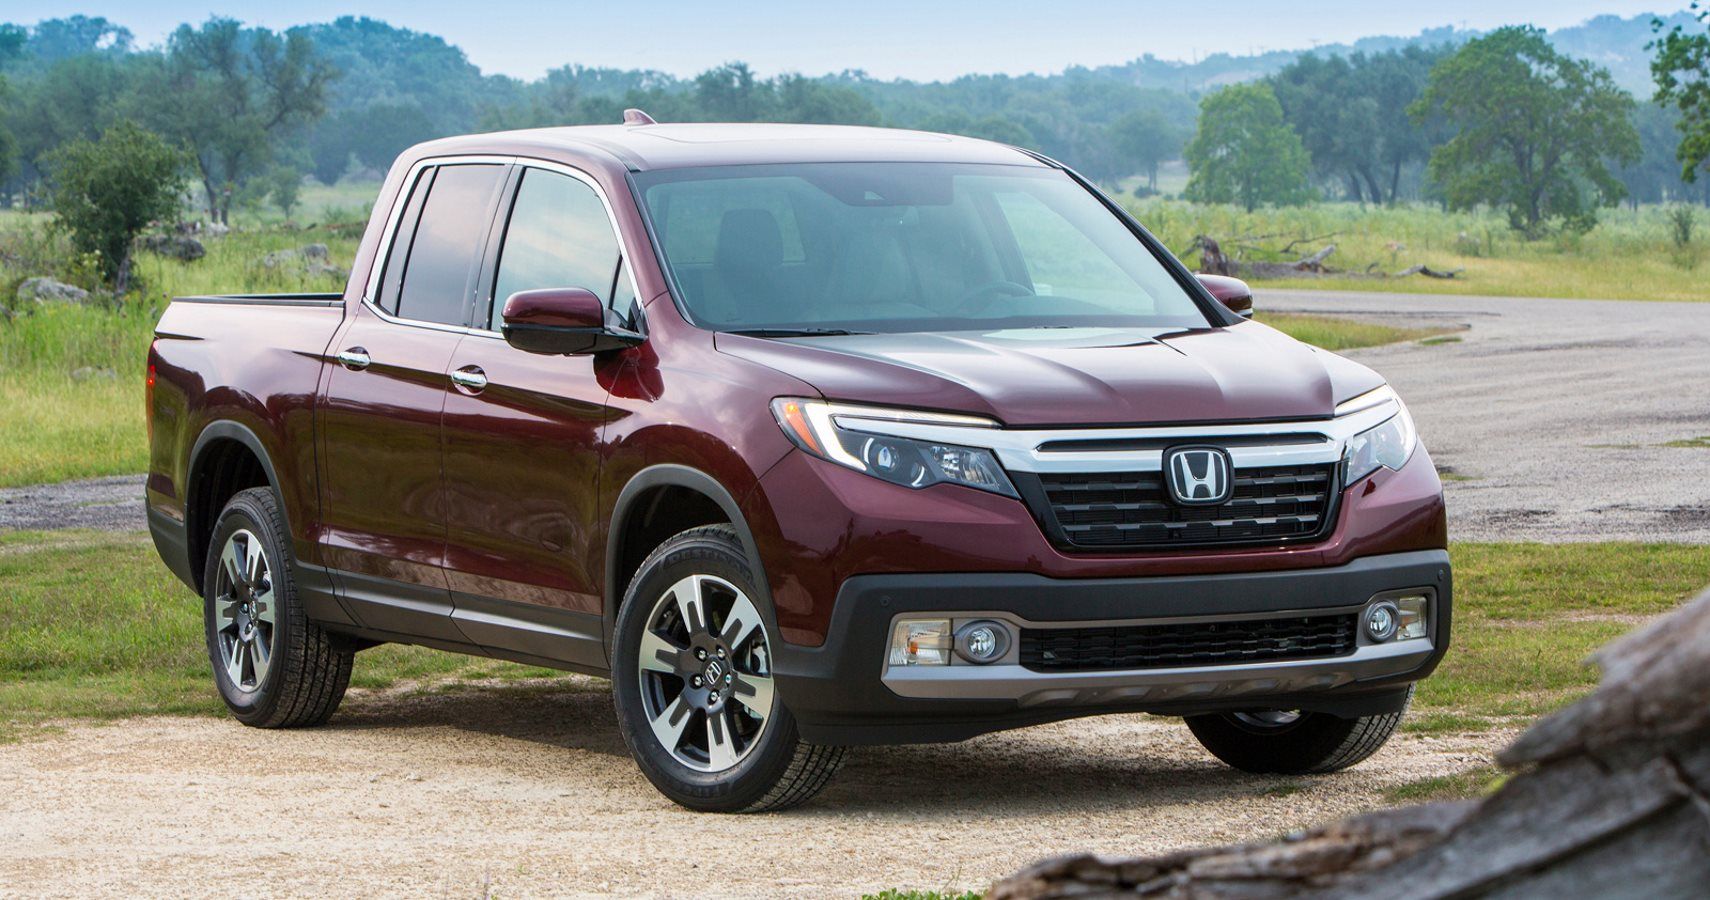 New Recall For Honda Ridgeline Warns Of Explosion Risk From Washing Your Car